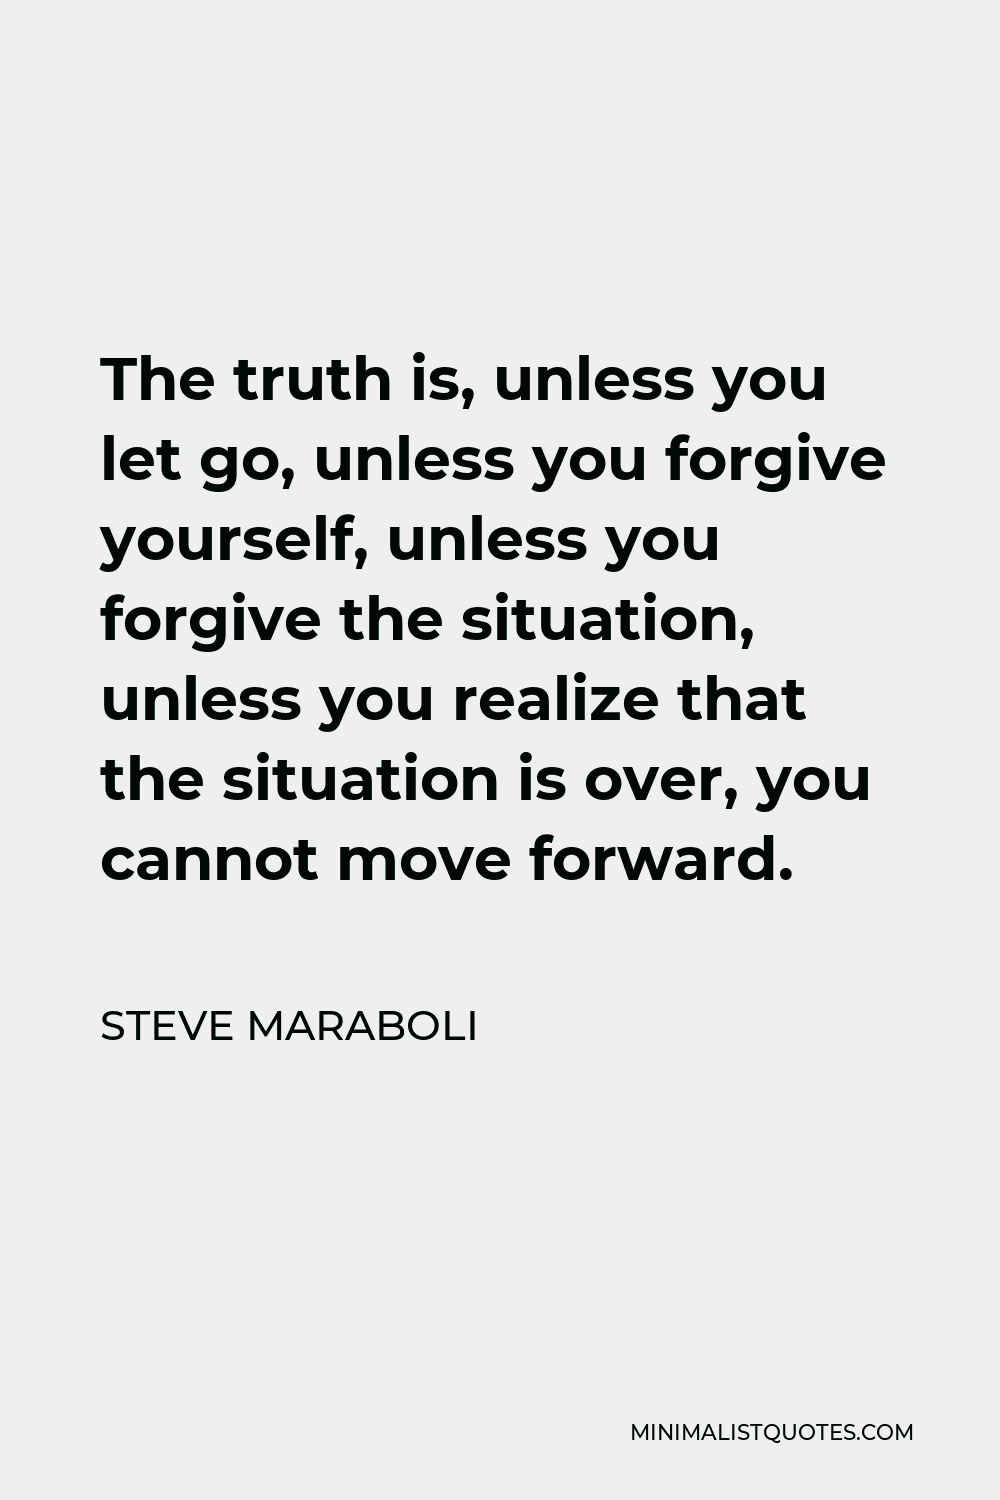 Steve Maraboli Quote - The truth is, unless you let go, unless you forgive yourself, unless you forgive the situation, unless you realize that the situation is over, you cannot move forward.